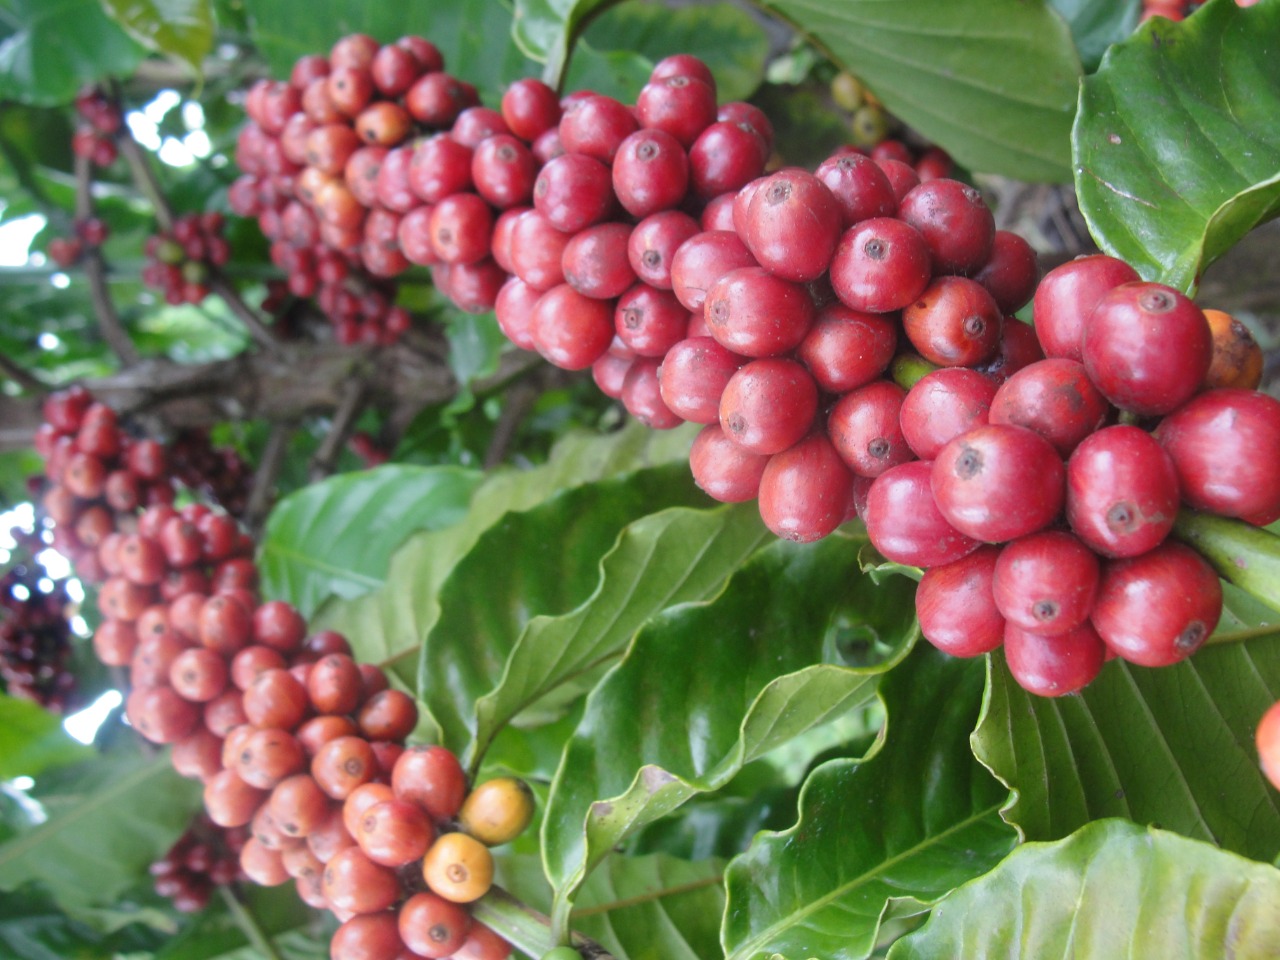 Let's Talk About Robusta